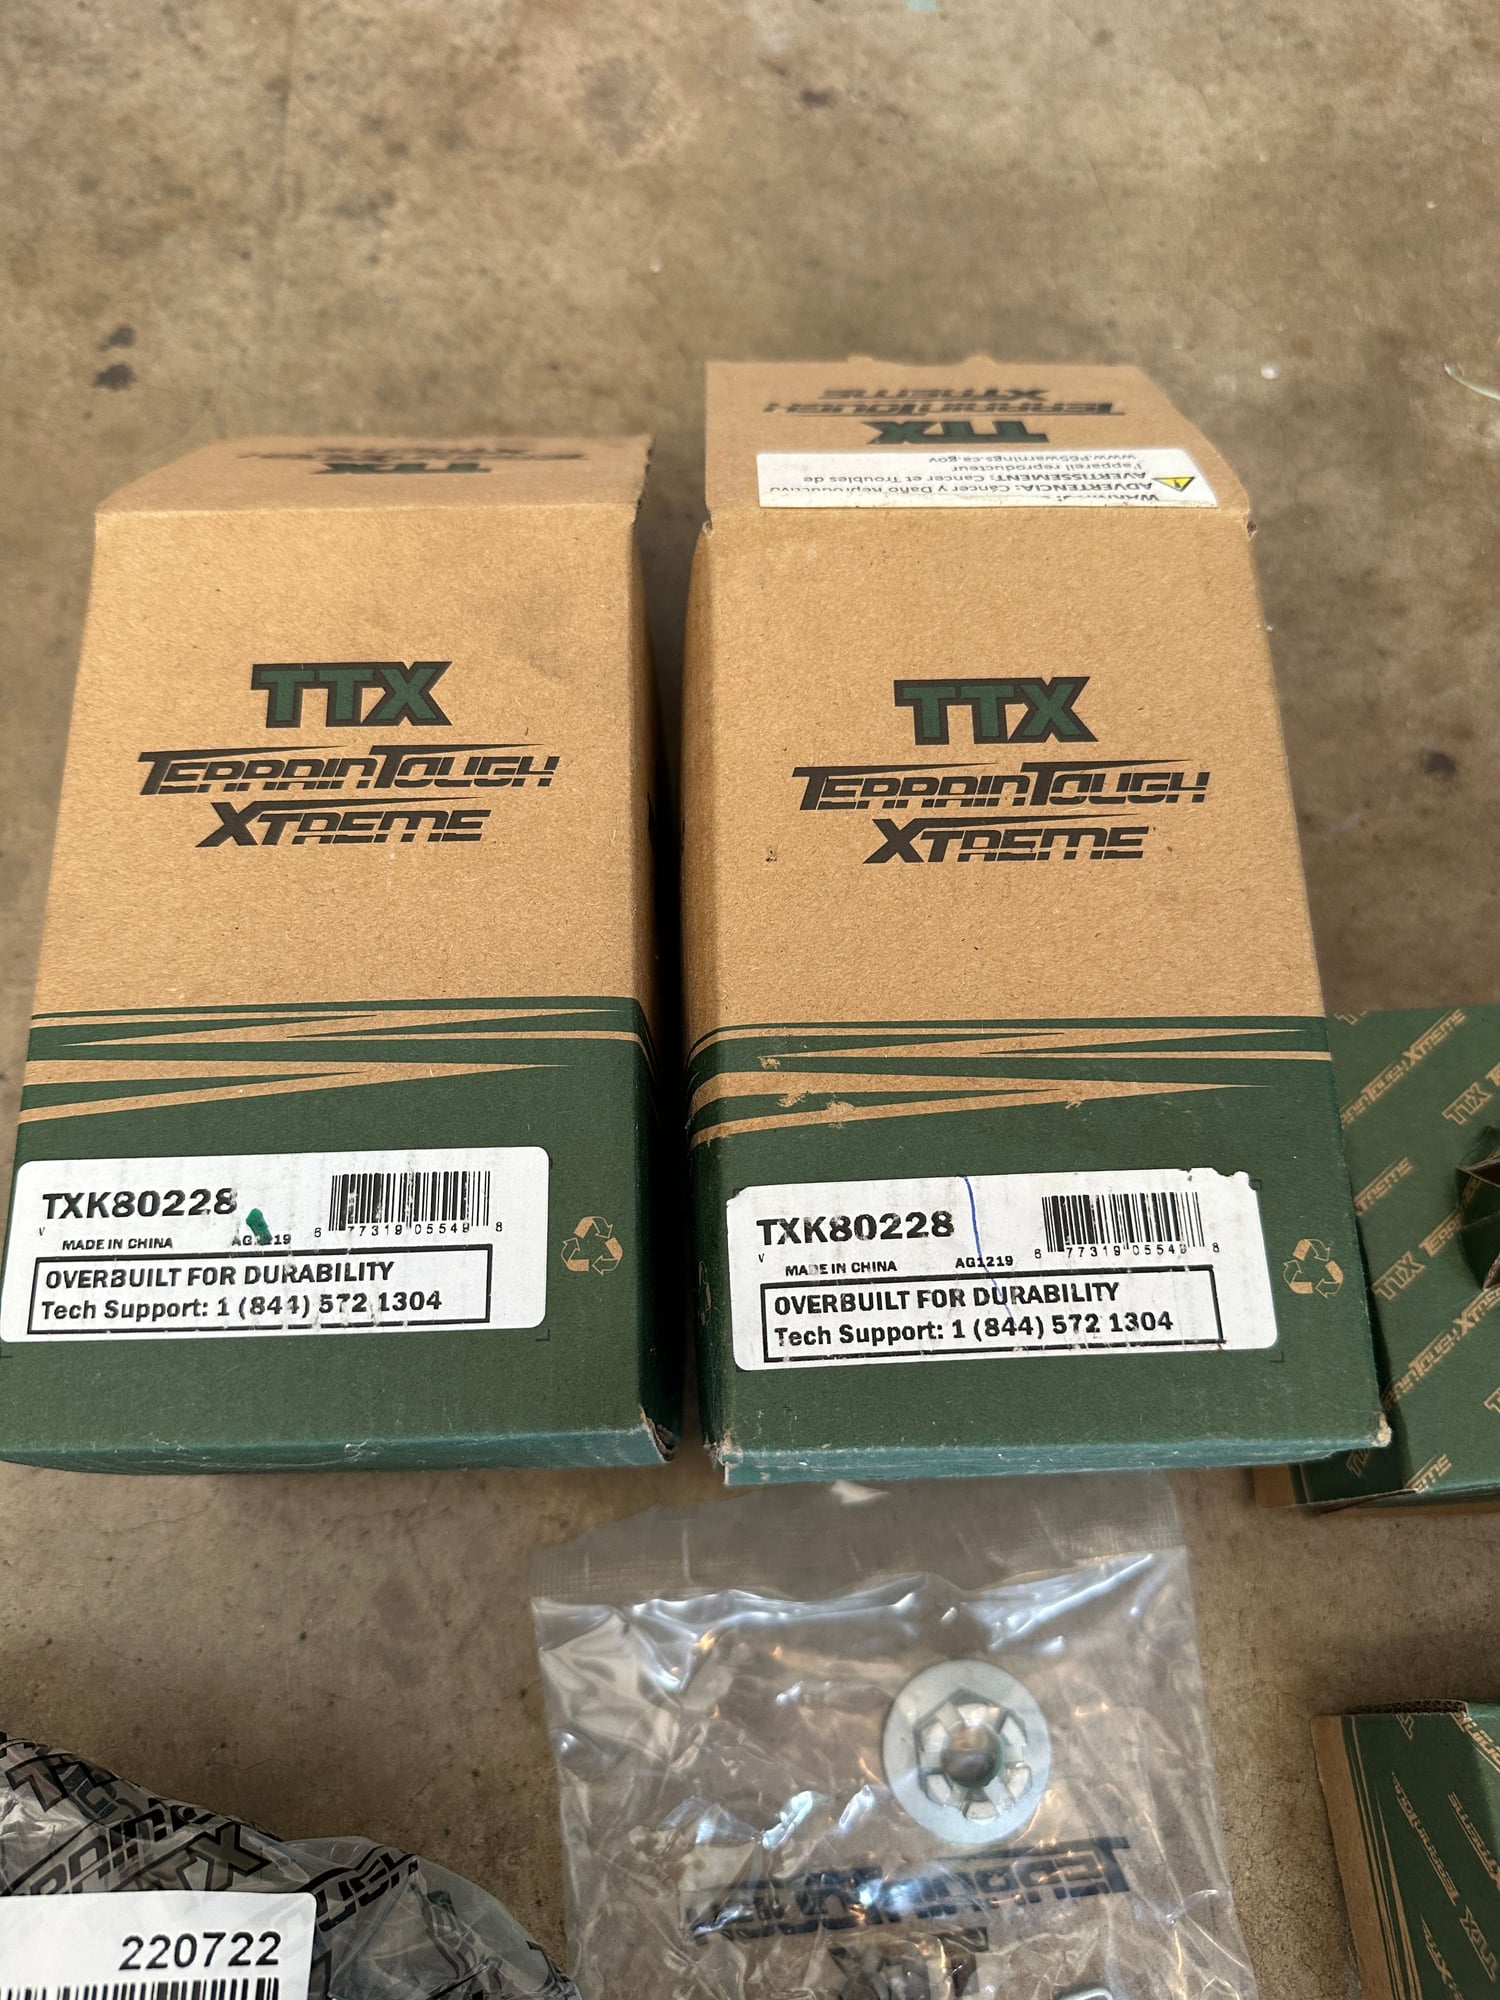 Steering/Suspension - FS: 04-08 Acura TL Mevotech TTX Lower Ball Joints / New - Opened - New - 2004 to 2008 Acura TL - 2004 to 2008 Acura TSX - 2003 to 2007 Honda Accord - Pflugerville, TX 78660, United States